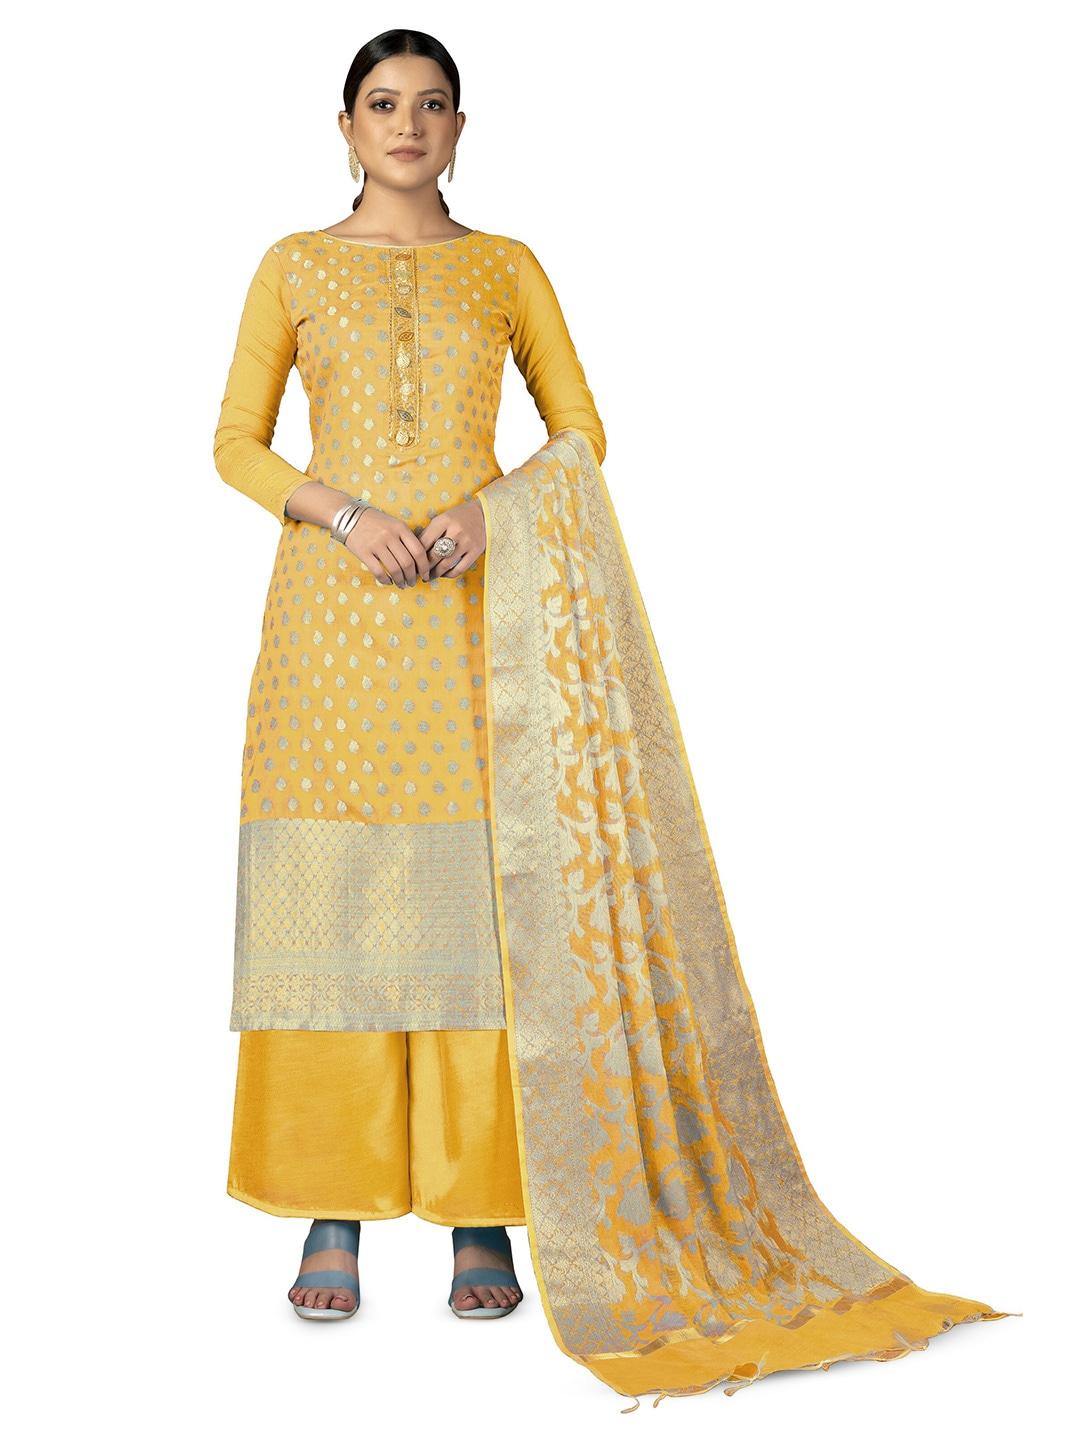 MANVAA Yellow Unstitched Dress Material